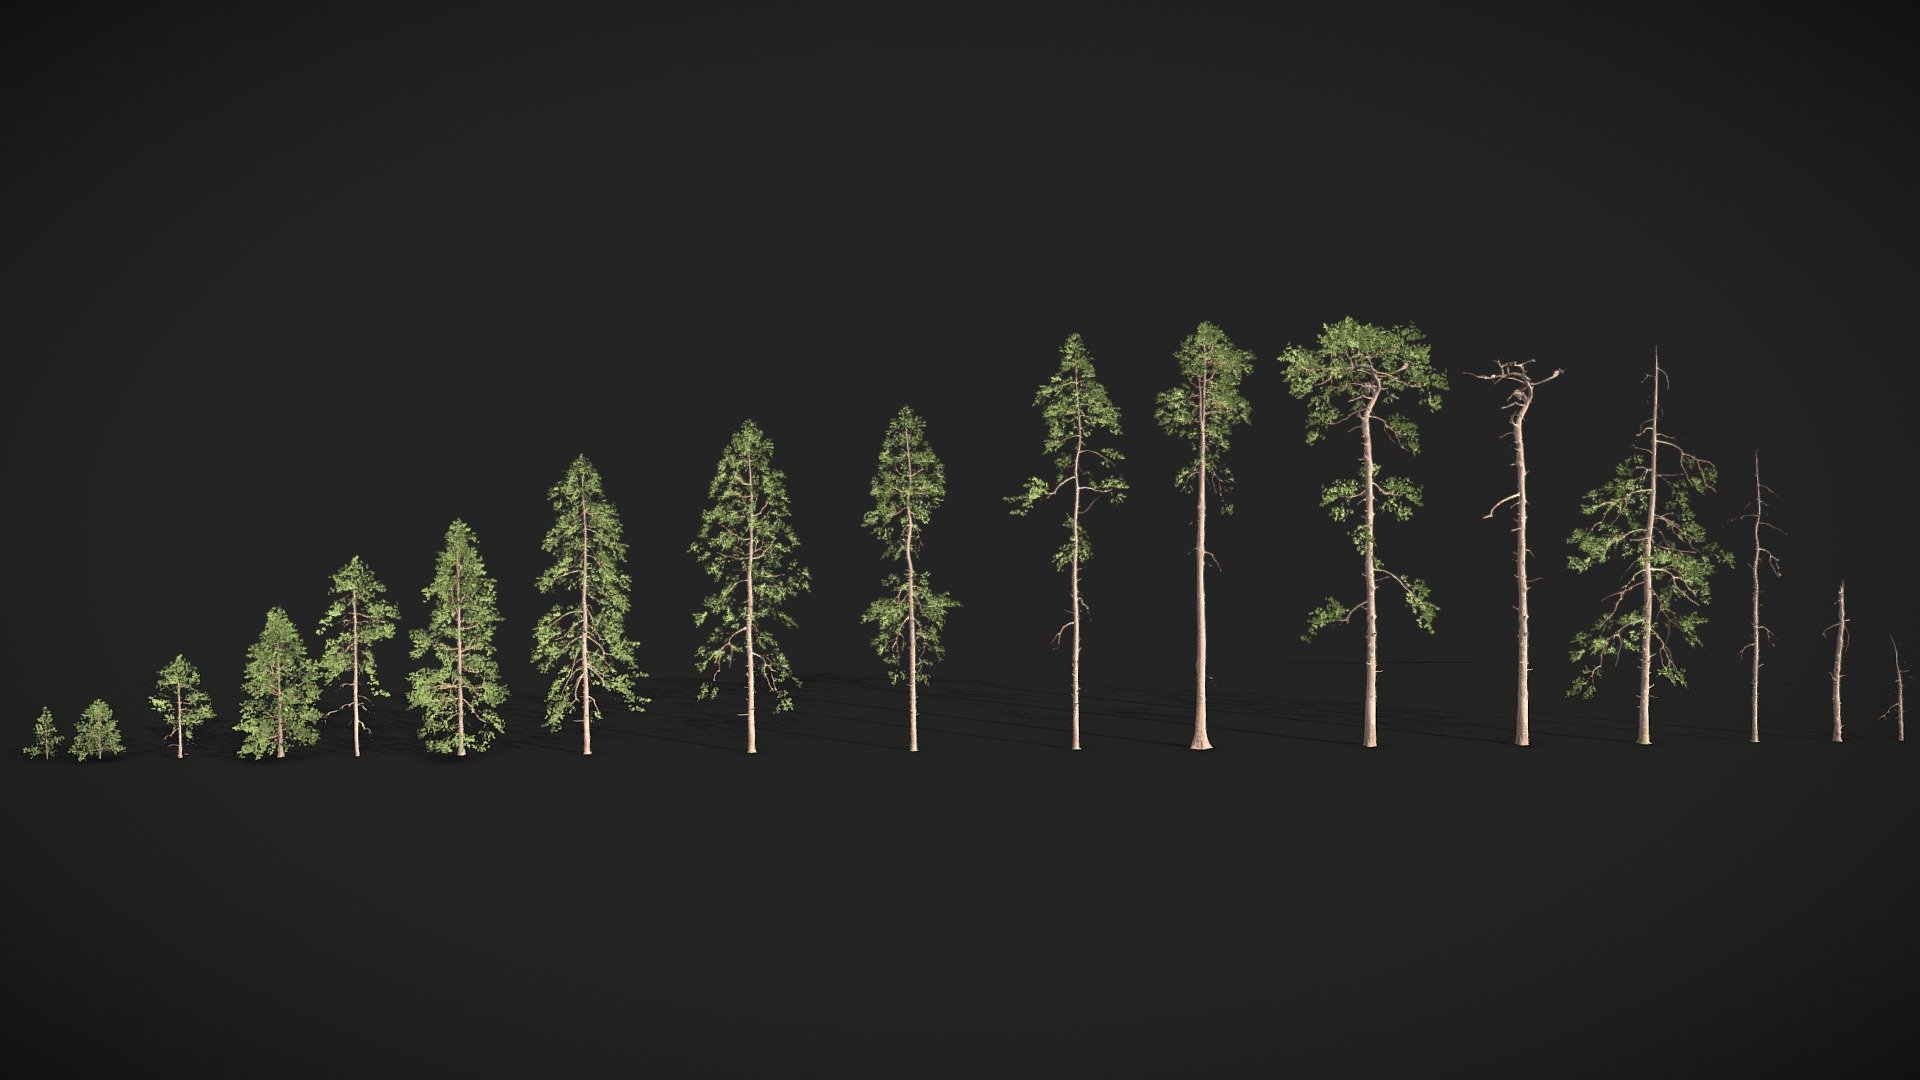 A Realistic Pine Tree Collection. Suitable for Blender or other similar software as well as for game engines like Unreal Engine.

It's not just a tree collection, the pack has all the trees you need for a realistic pine forest!

Additional Files Contain:




.blend with packed textures

.fbx

.obj

textures

Example Scene rendered with Cycles Blender:


The pack was made in Blender and works best in Blender. All materials are already set up you just need to render! 
It works in Cycles and Eevee since it's game ready.

The model has some onesided faces which make it look like some normals are flipped, but that is fixed in the Blender File or when you use the Foliage Shader in the Unreal Engine - Realistic Pine Conifer Tree Collection - Buy Royalty Free 3D model by Per's Scan Collection (@perz_scans) 3d model